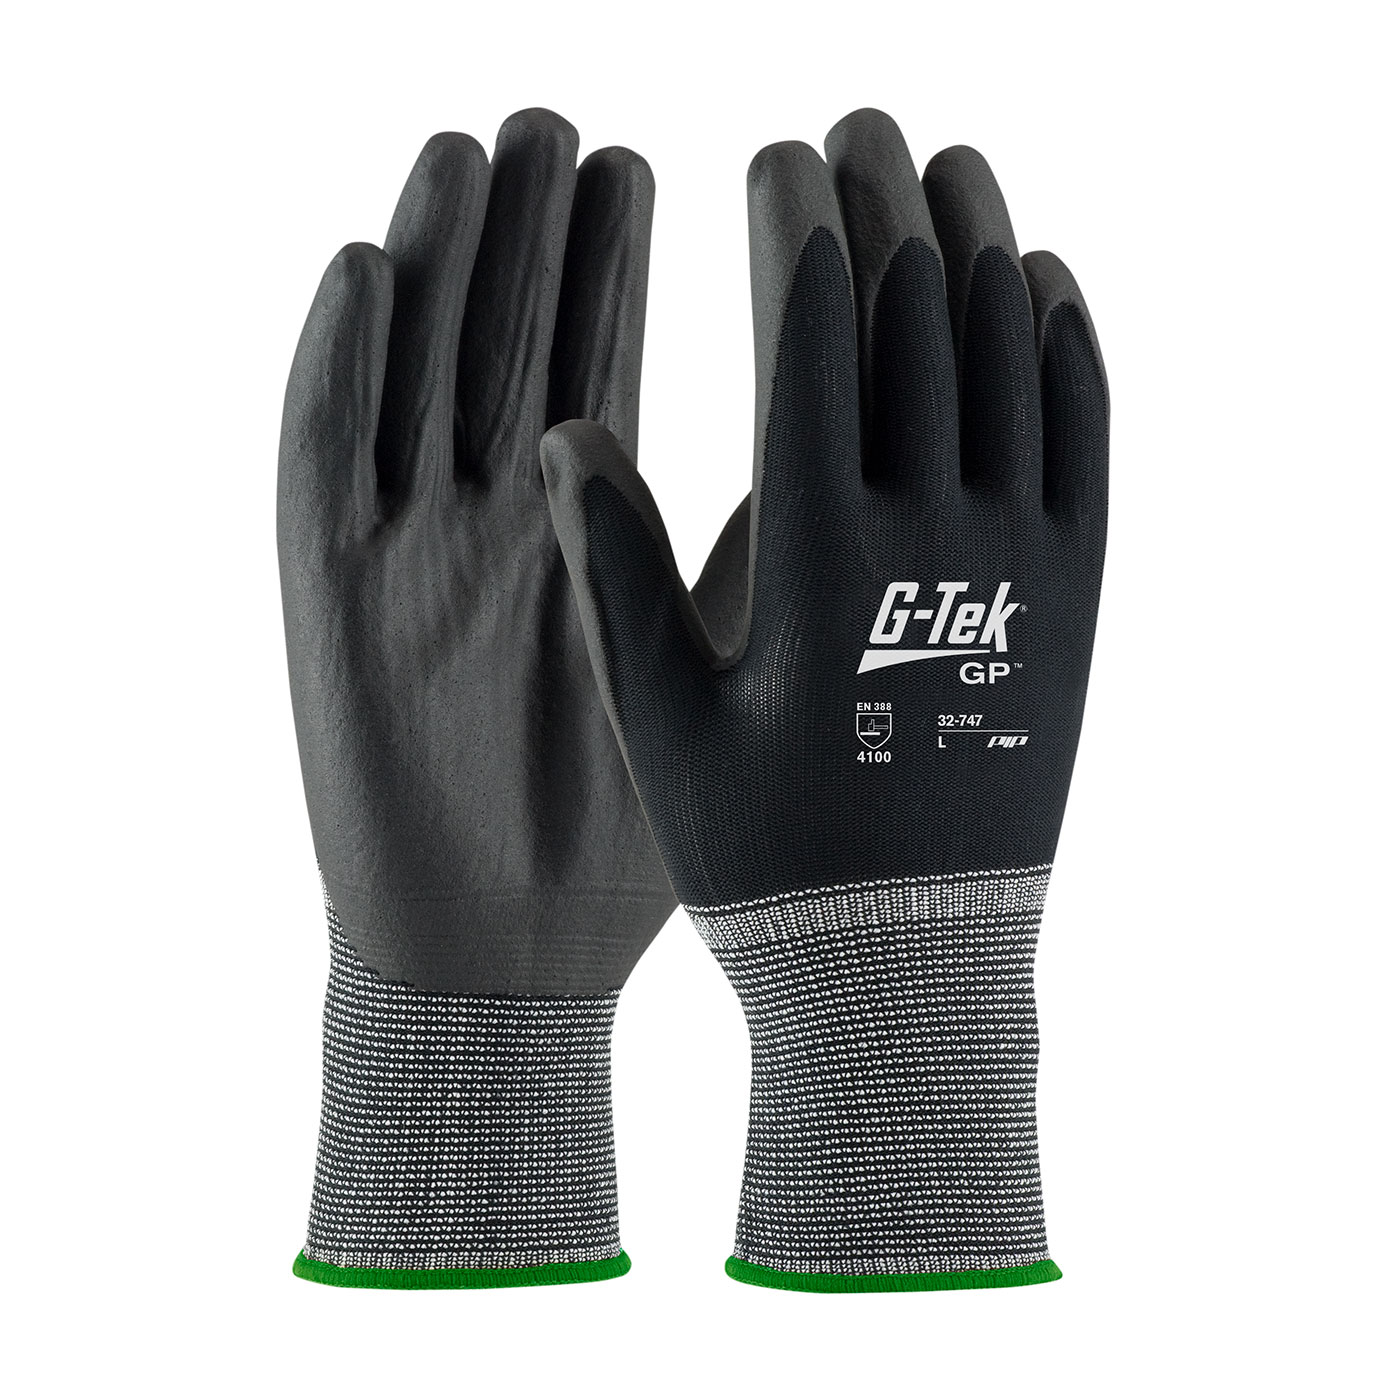 #32-747 PIP® G-Tek® GP™ Seamless Knit Nylon Glove with Air-Infused PVC Coating on Palm & Fingers 